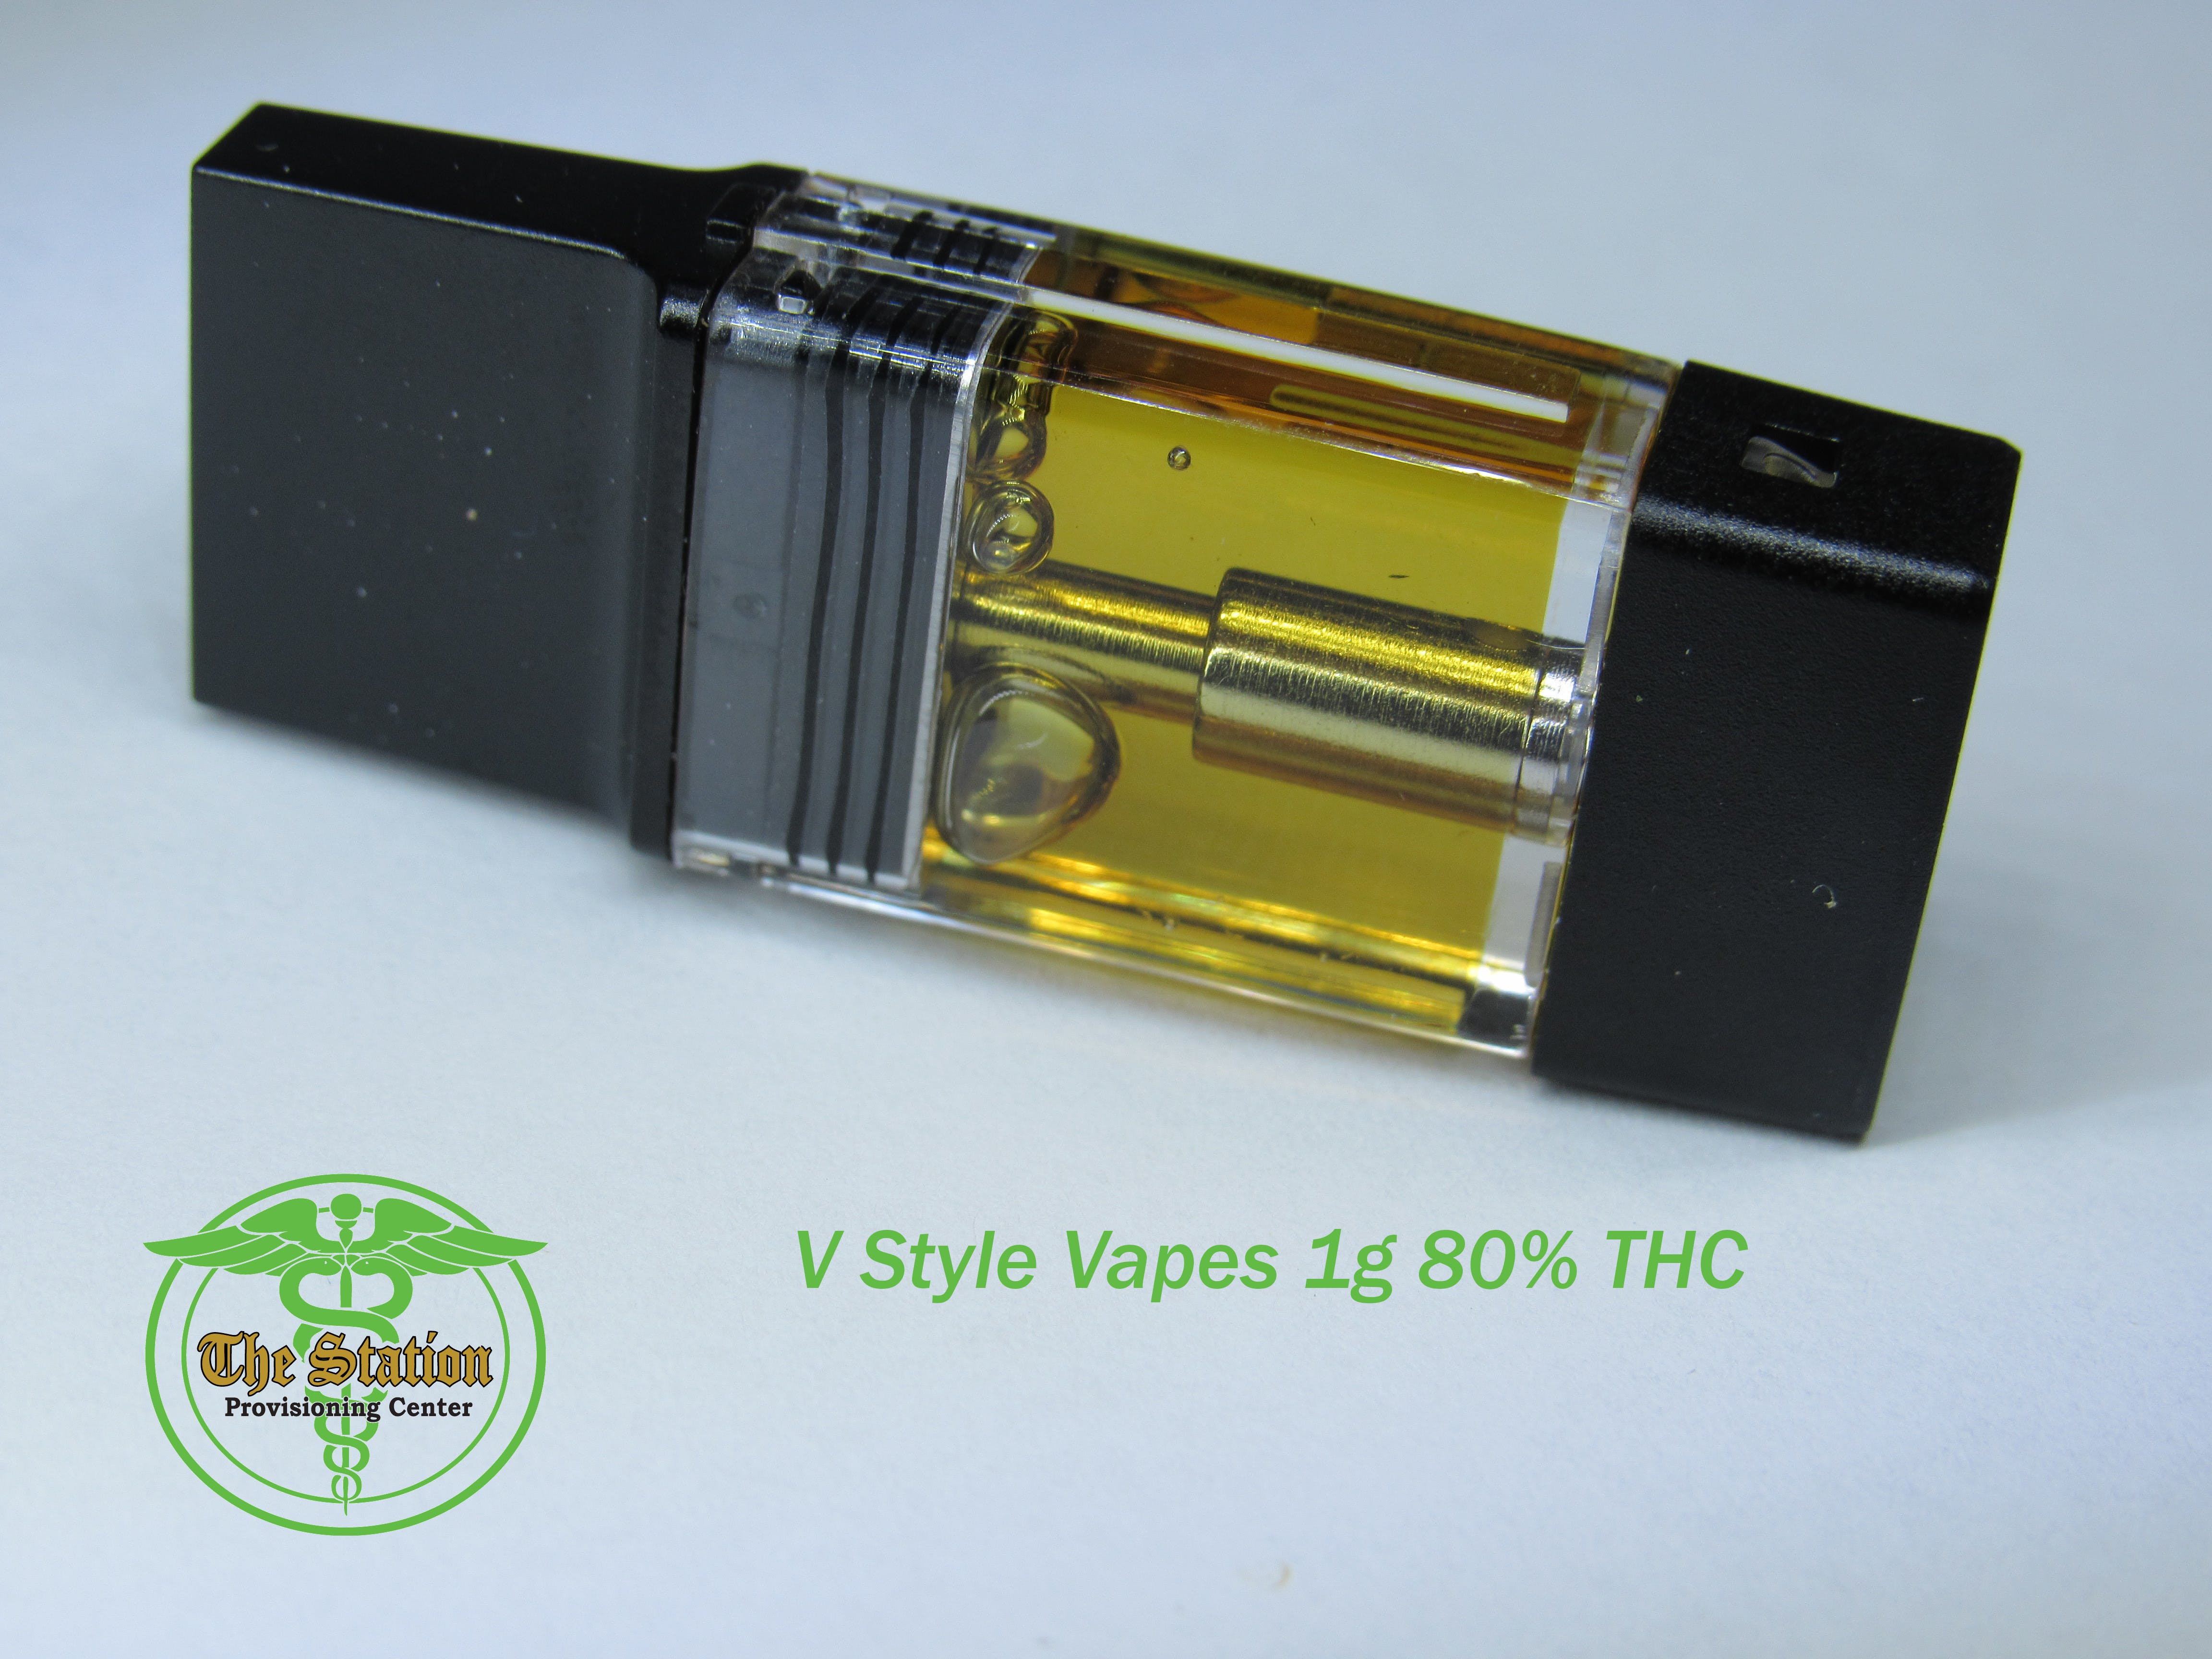 concentrate-v-style-1g-vapes